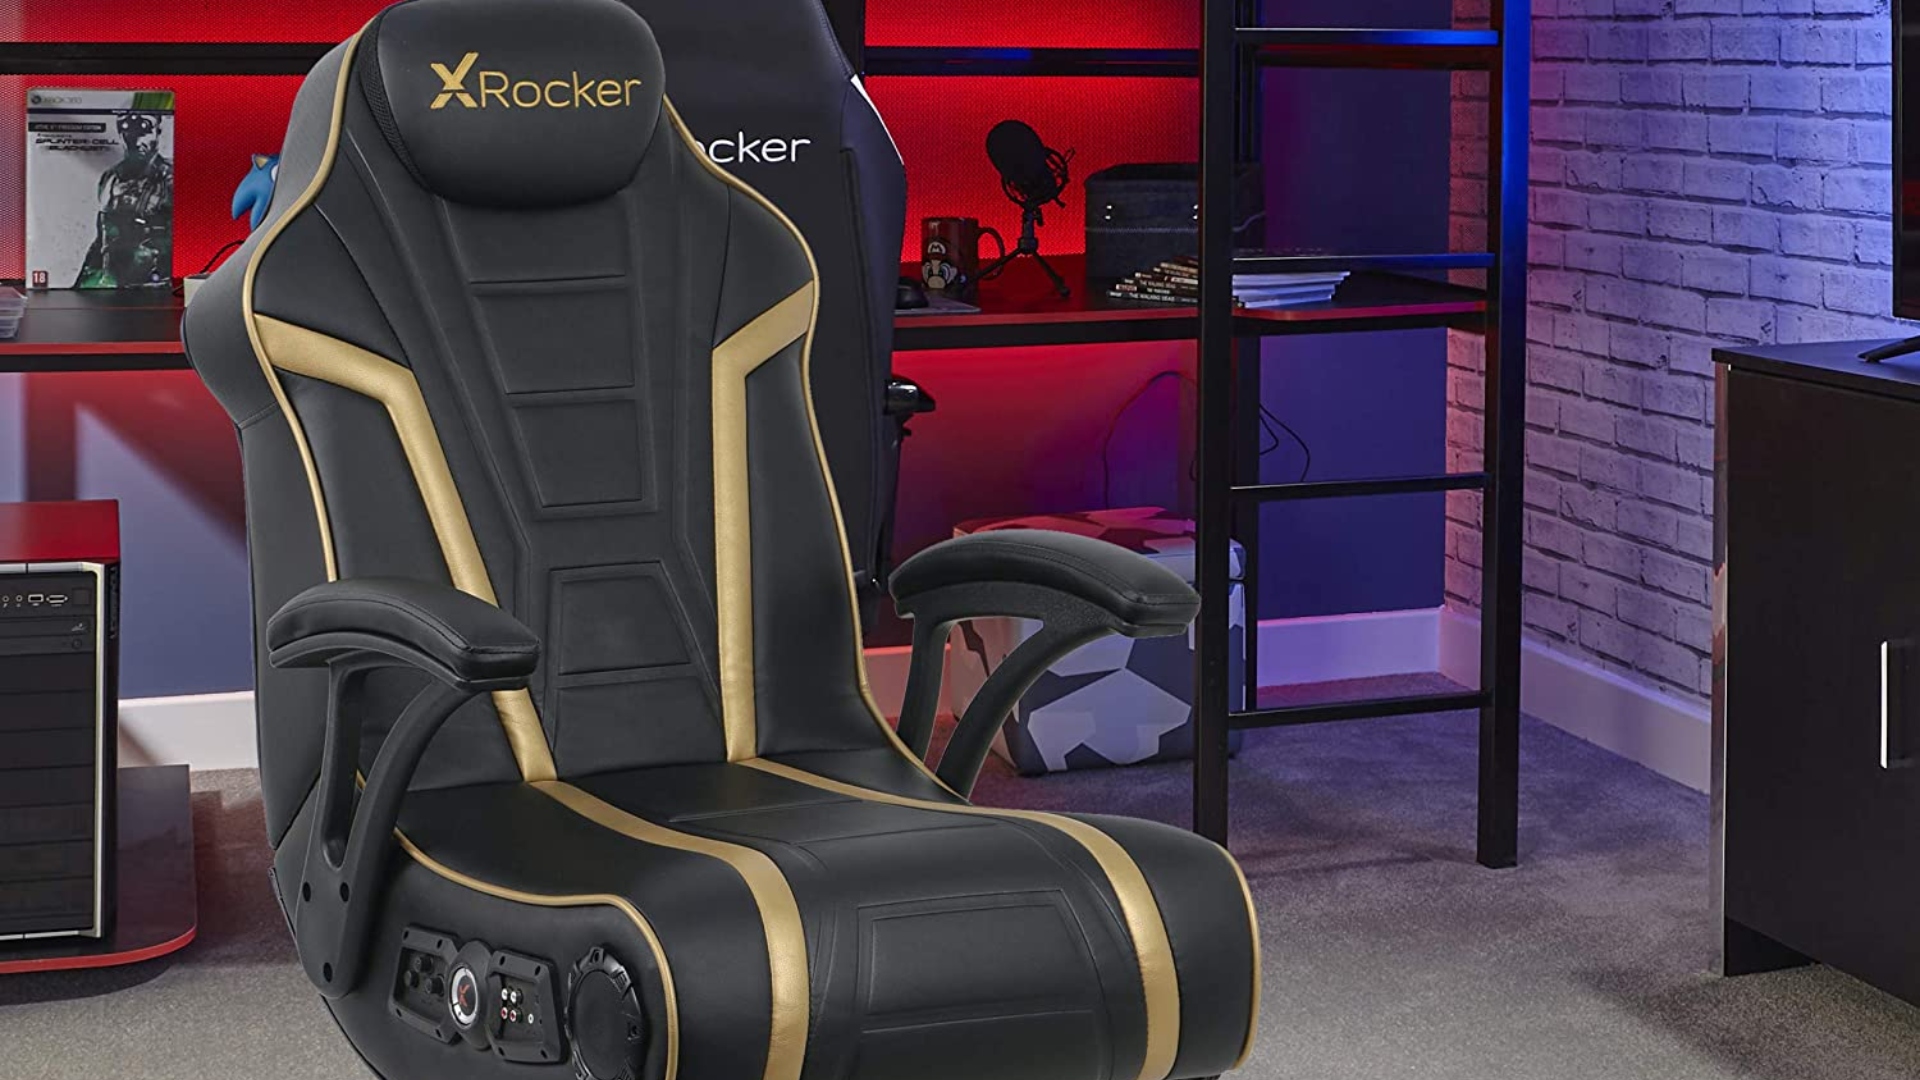 Game in comfort with an X Rocker gaming chair at 37% off